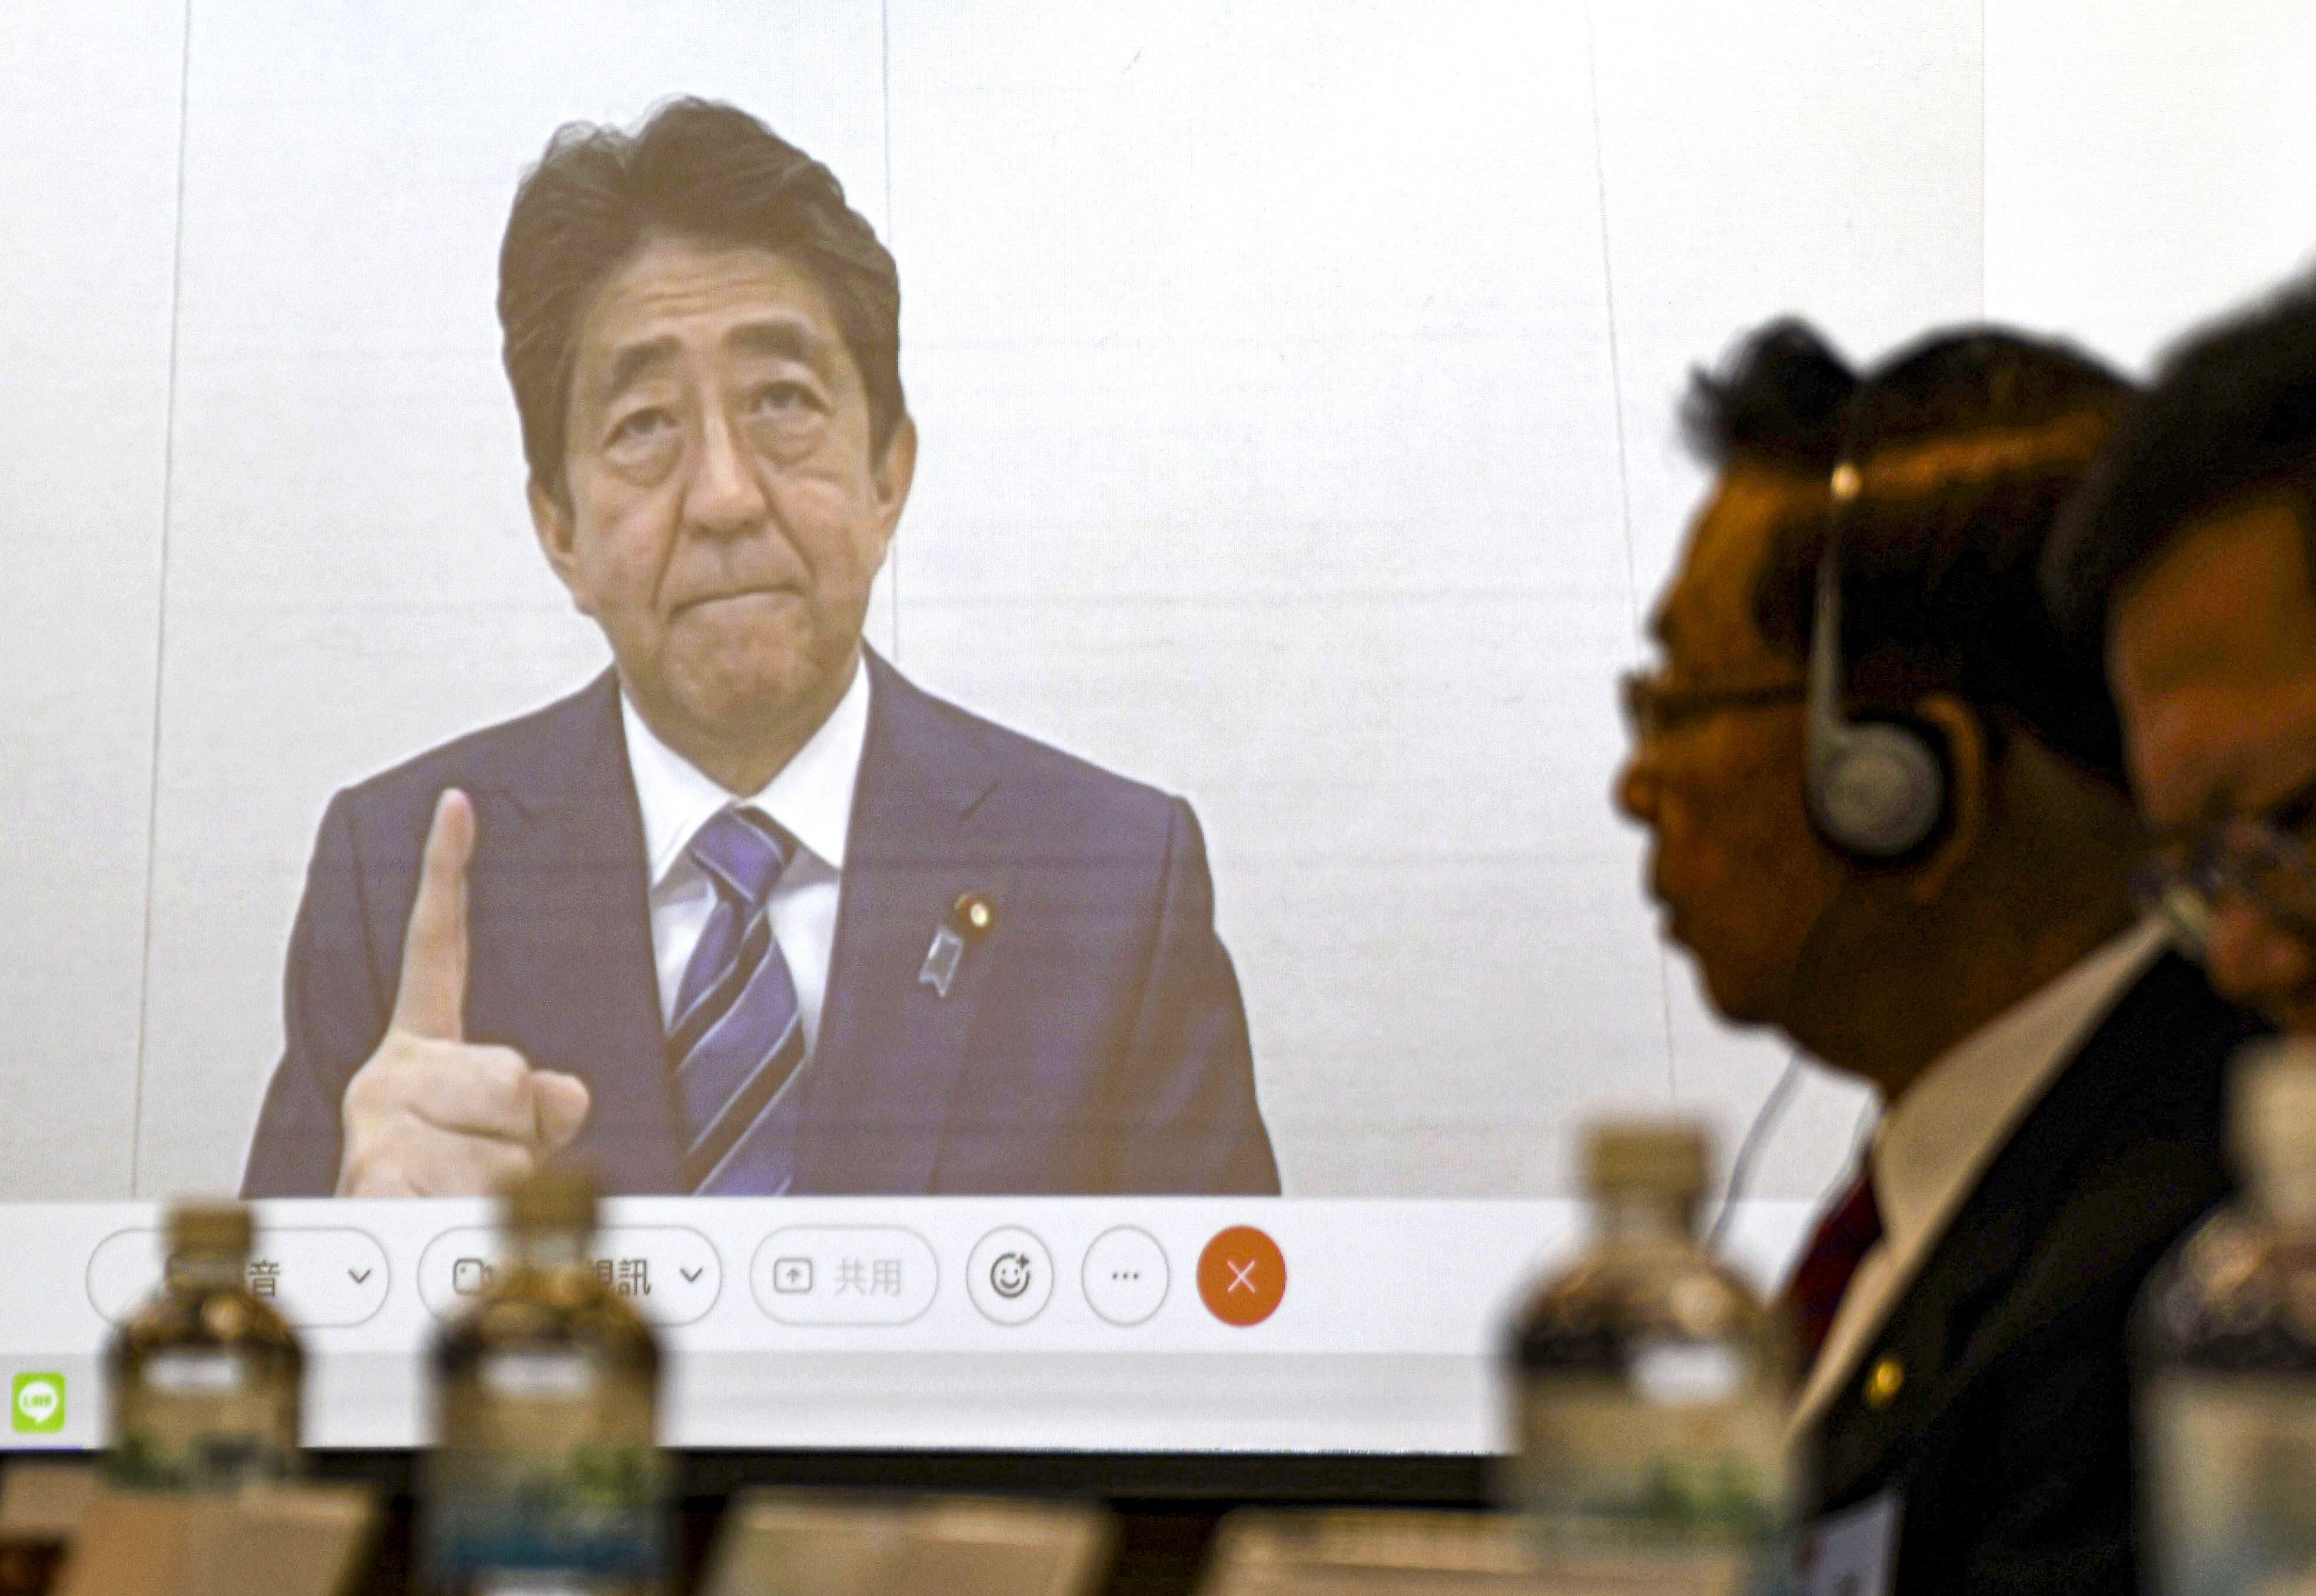 Shinzo Abe appears on a screen during a meeting in Taipei on December  1. Beijing lashed out at Abe after the former Japanese prime minister warned of the serious security and economic consequences of any mainland military action against the self-ruled island. Photo: Kyodo